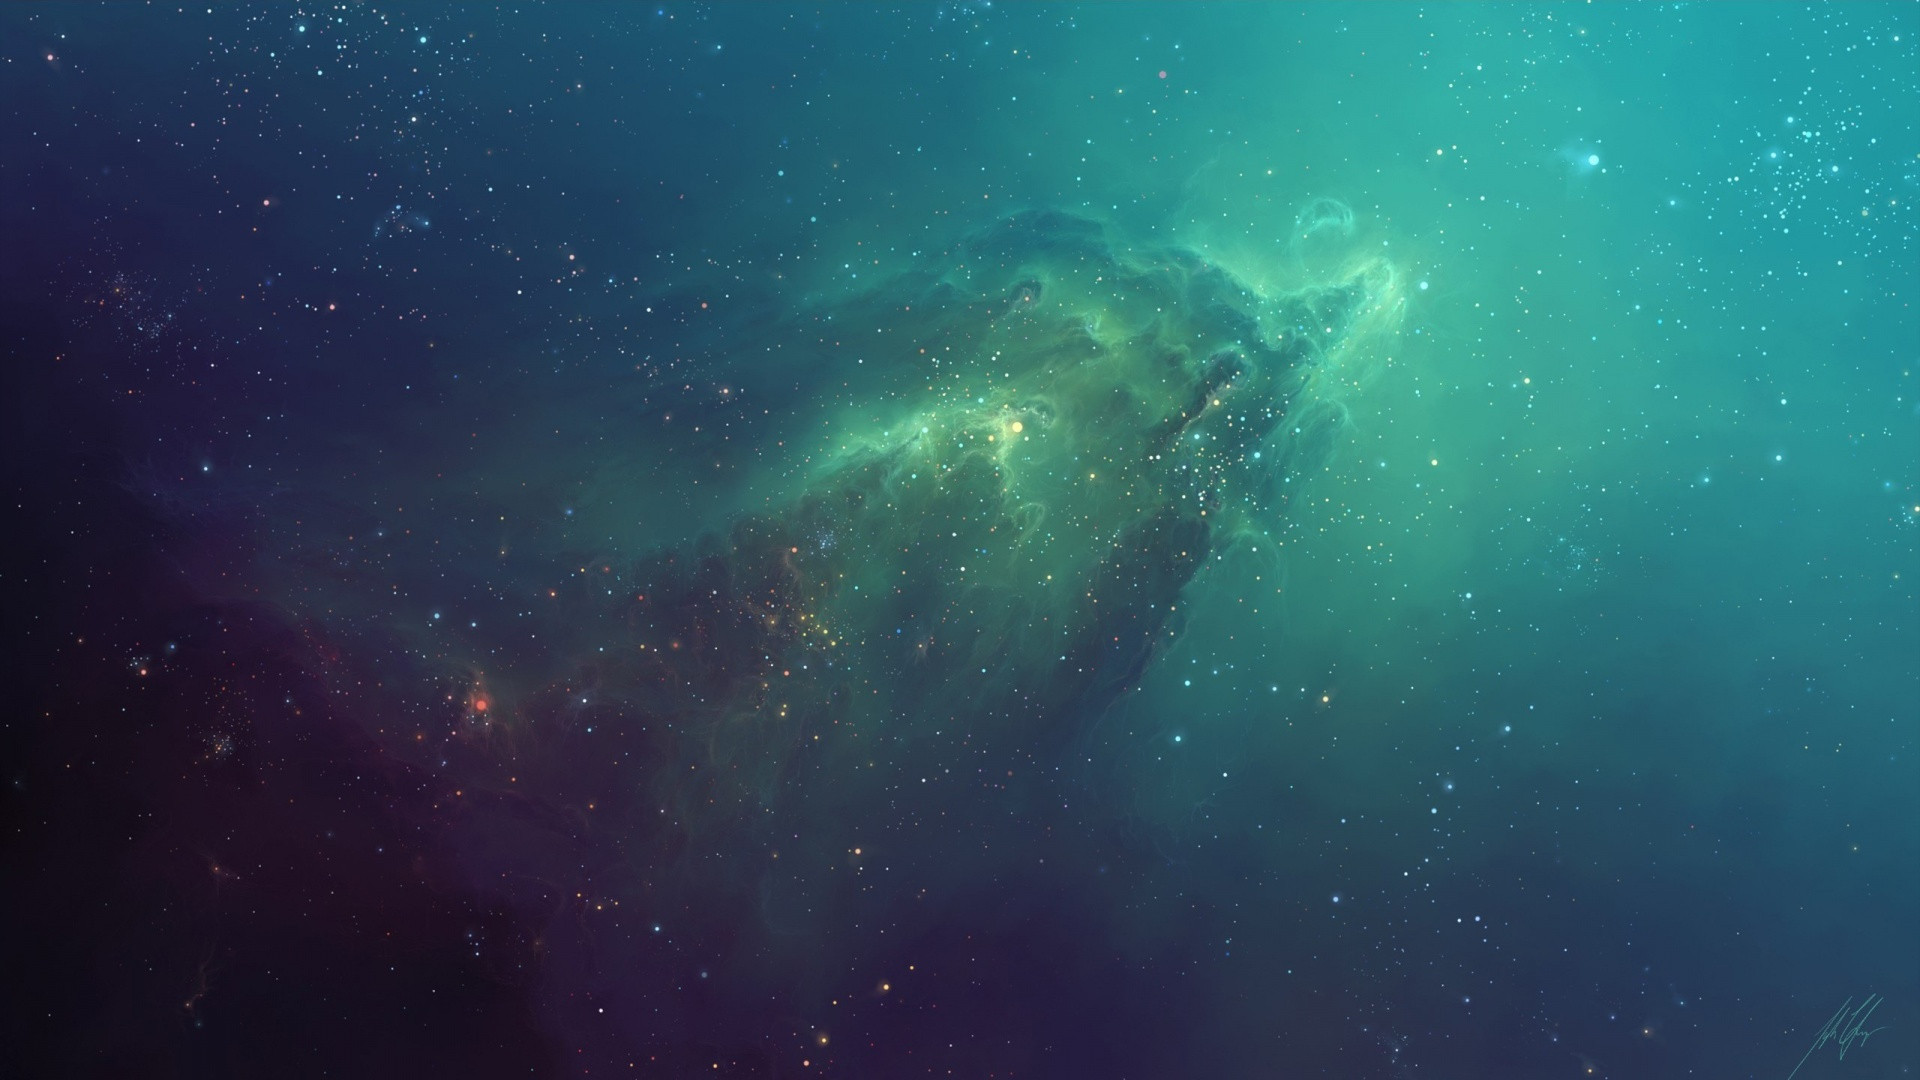 iOS 7 Nebula wallpaper I created a full res 2560x1440 version for my